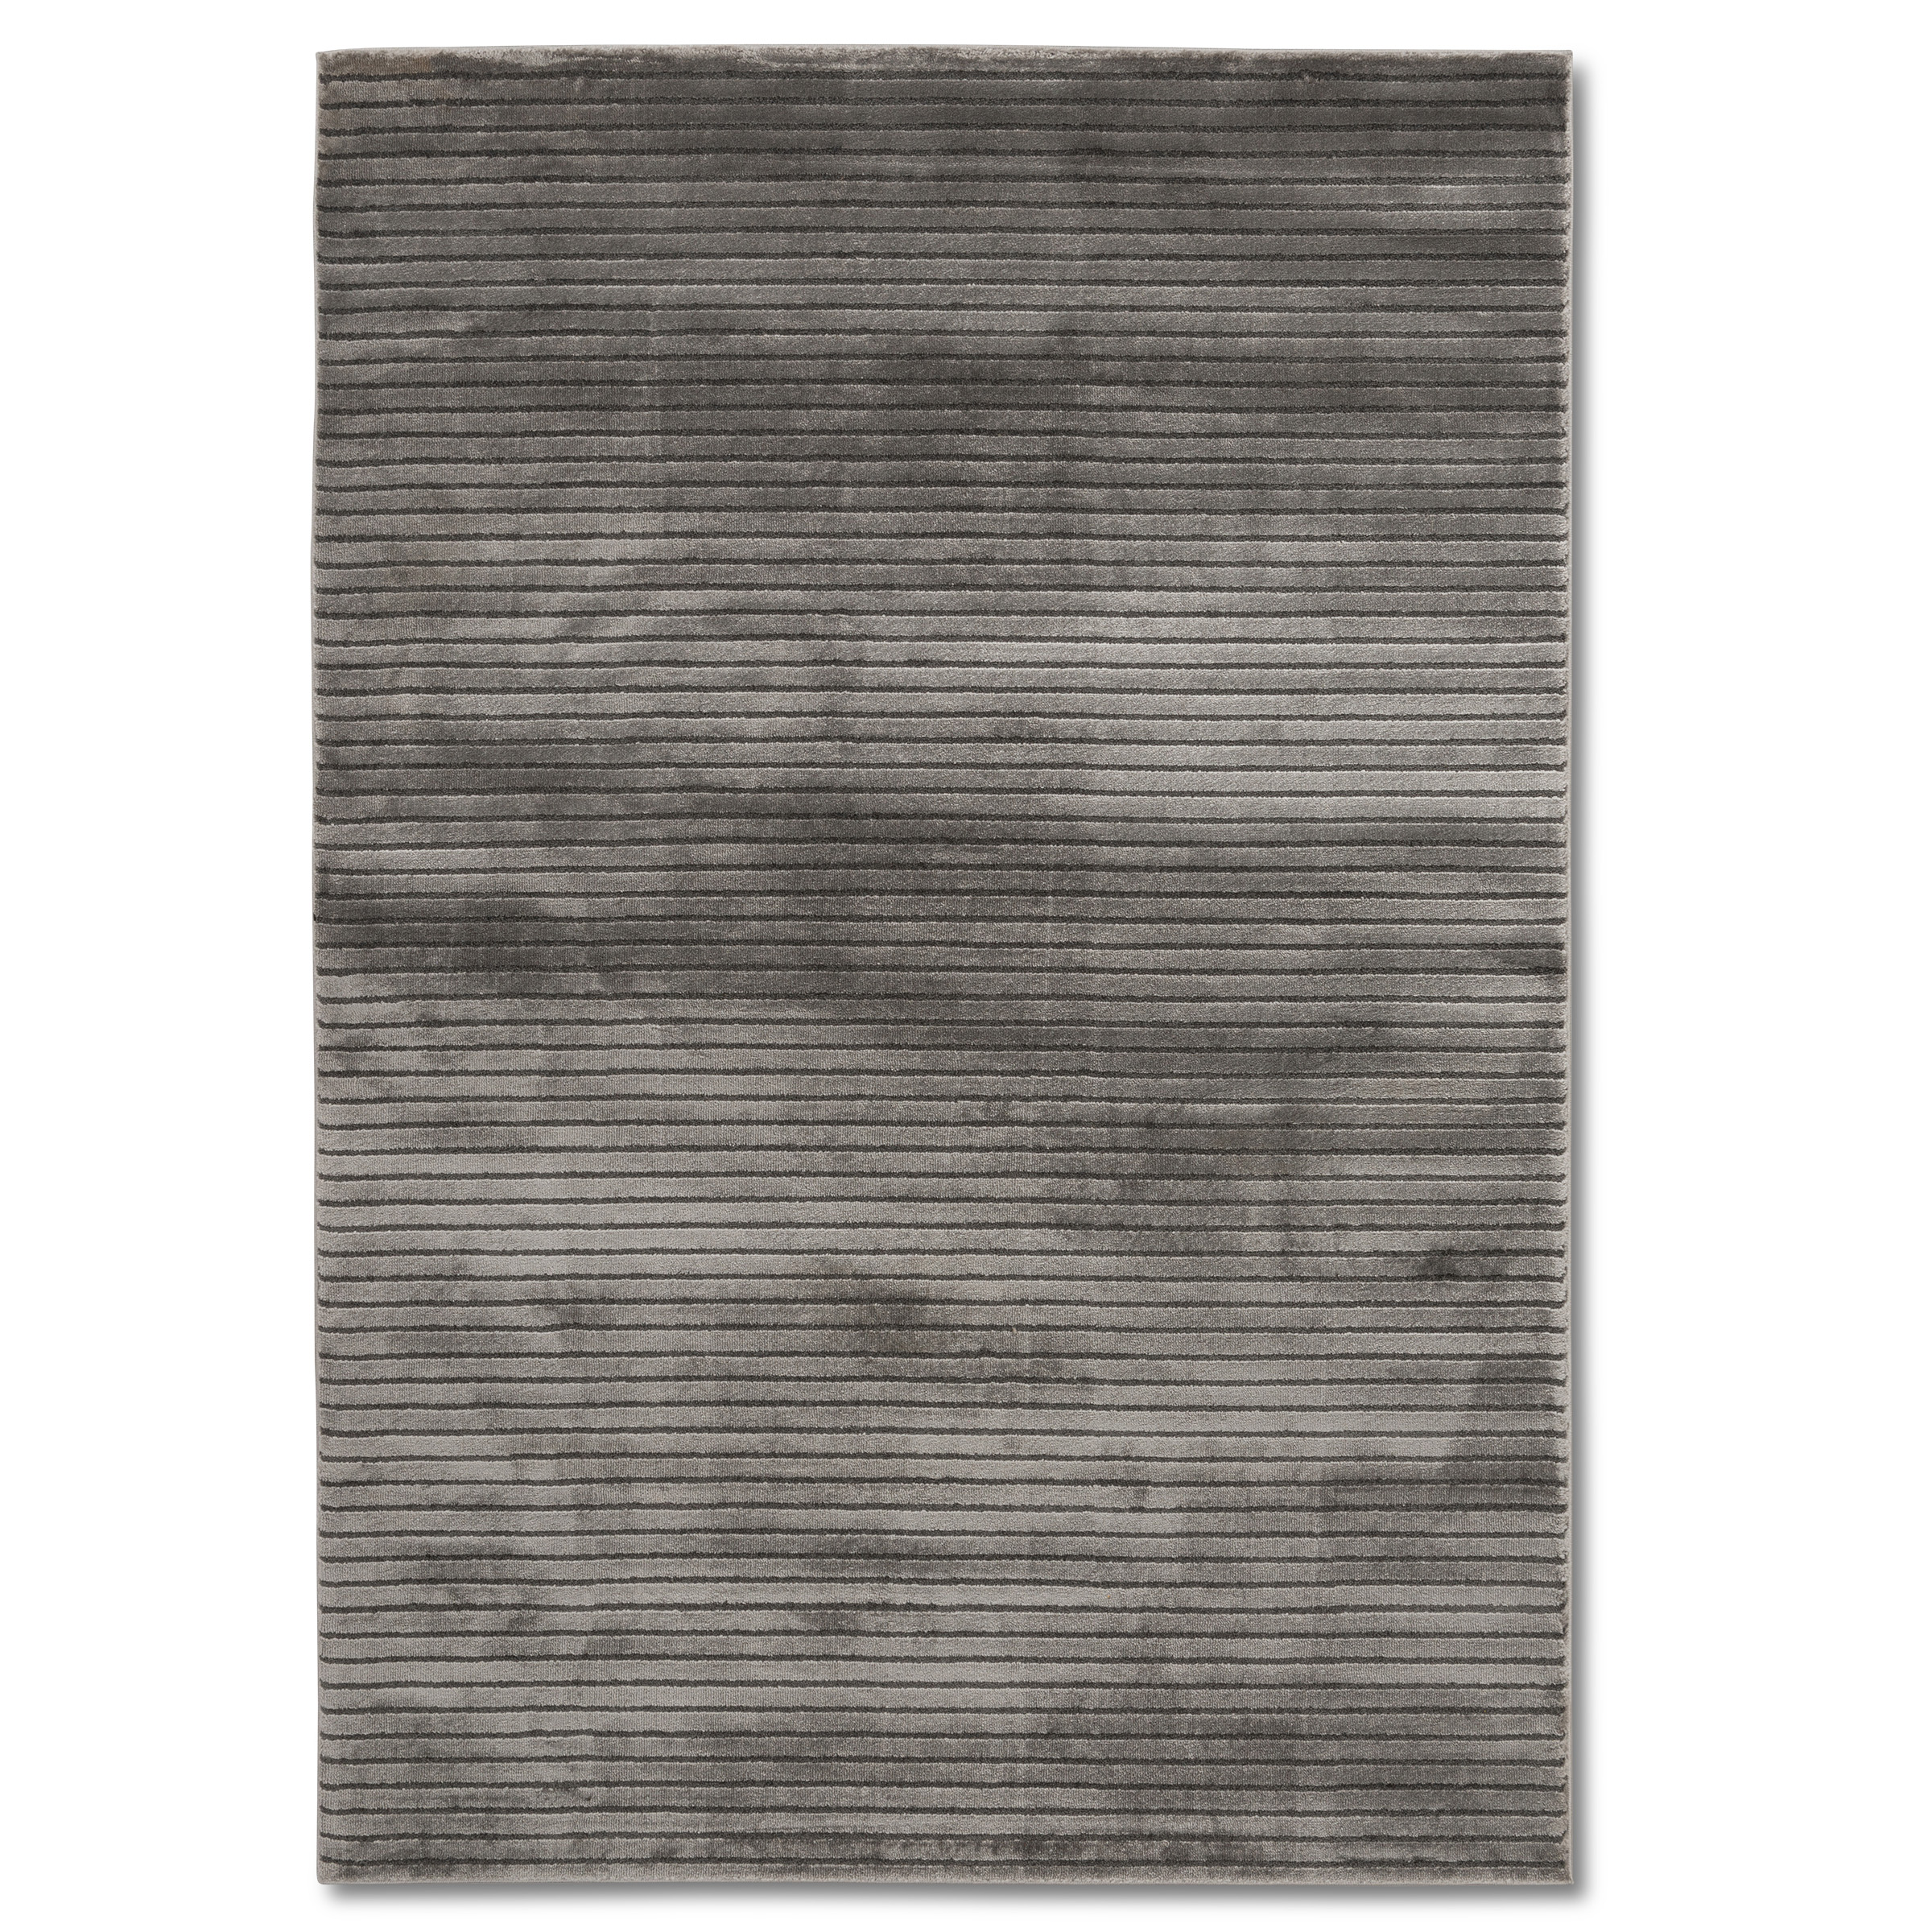 Linea Soft Powerloomed Anthracite Rug<br><h6>LIN-1000</h6>